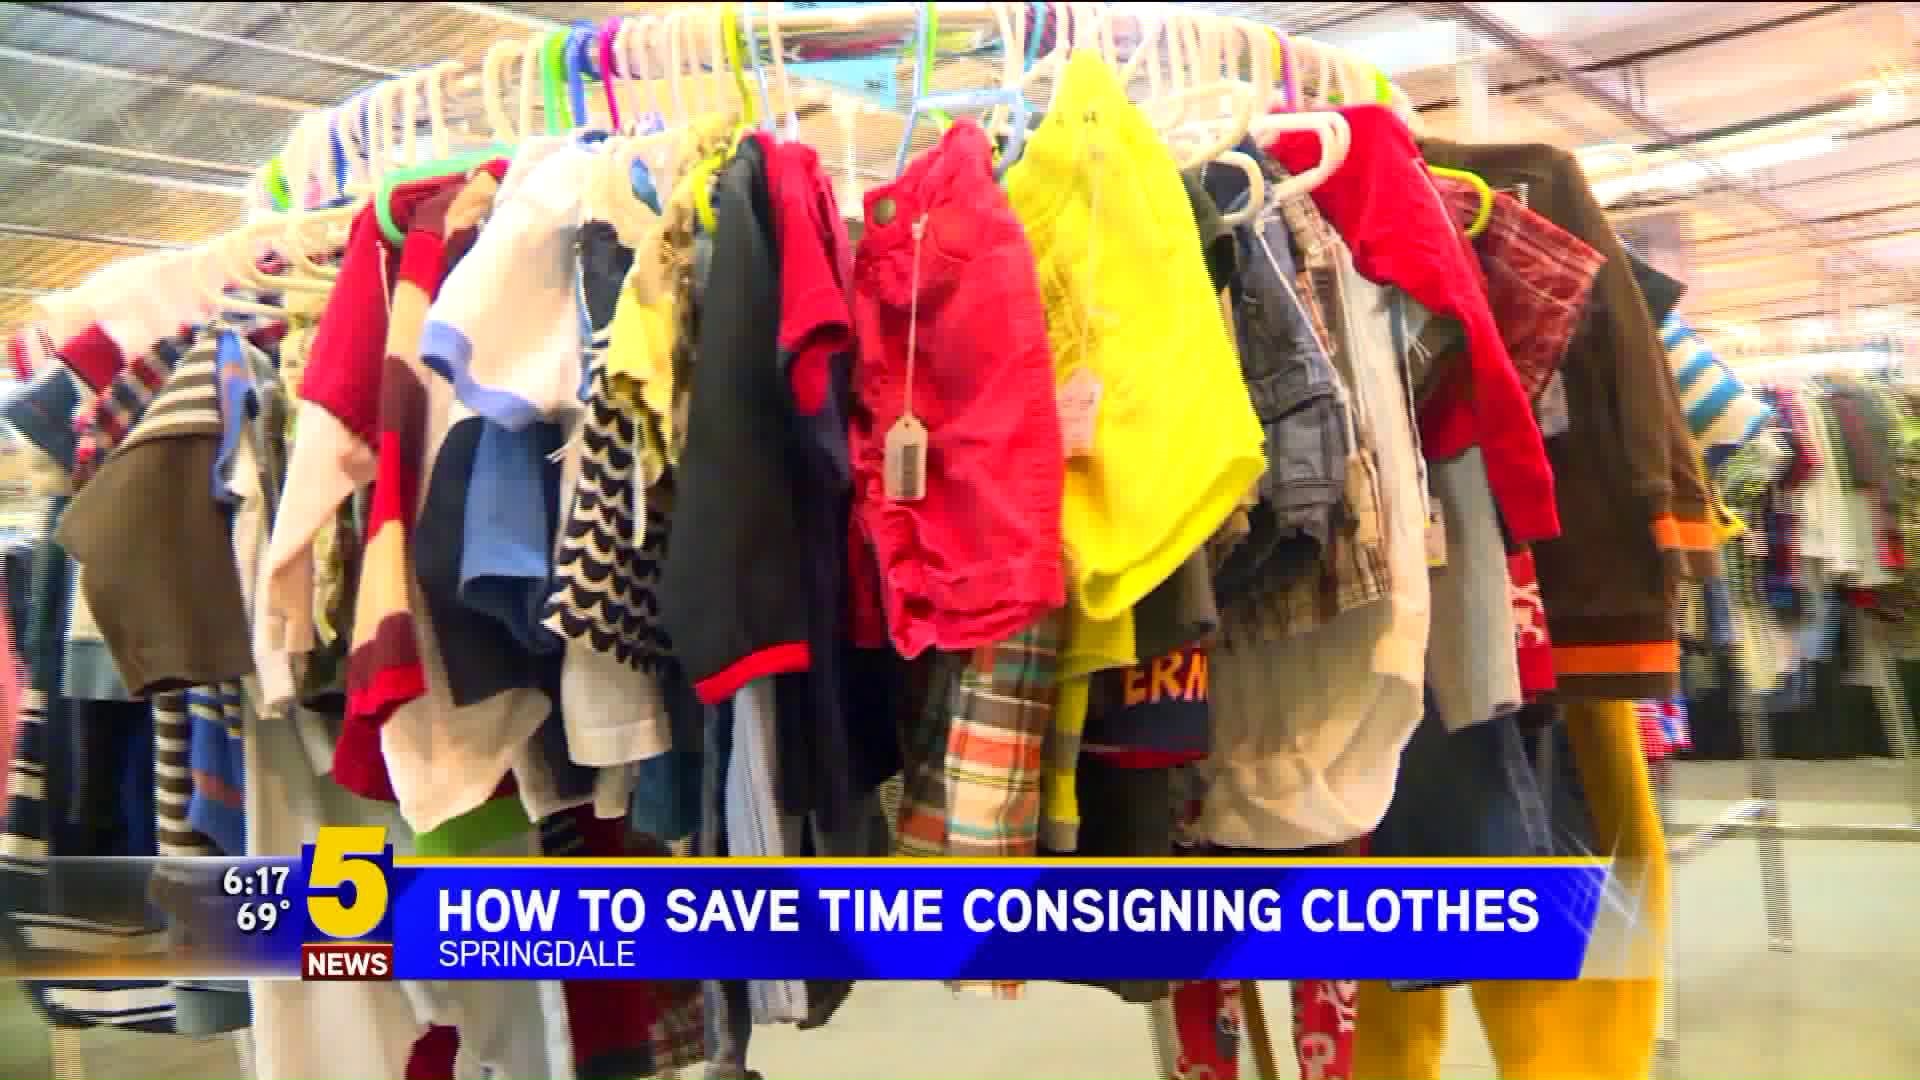 How To Save Time Consigning Clothes